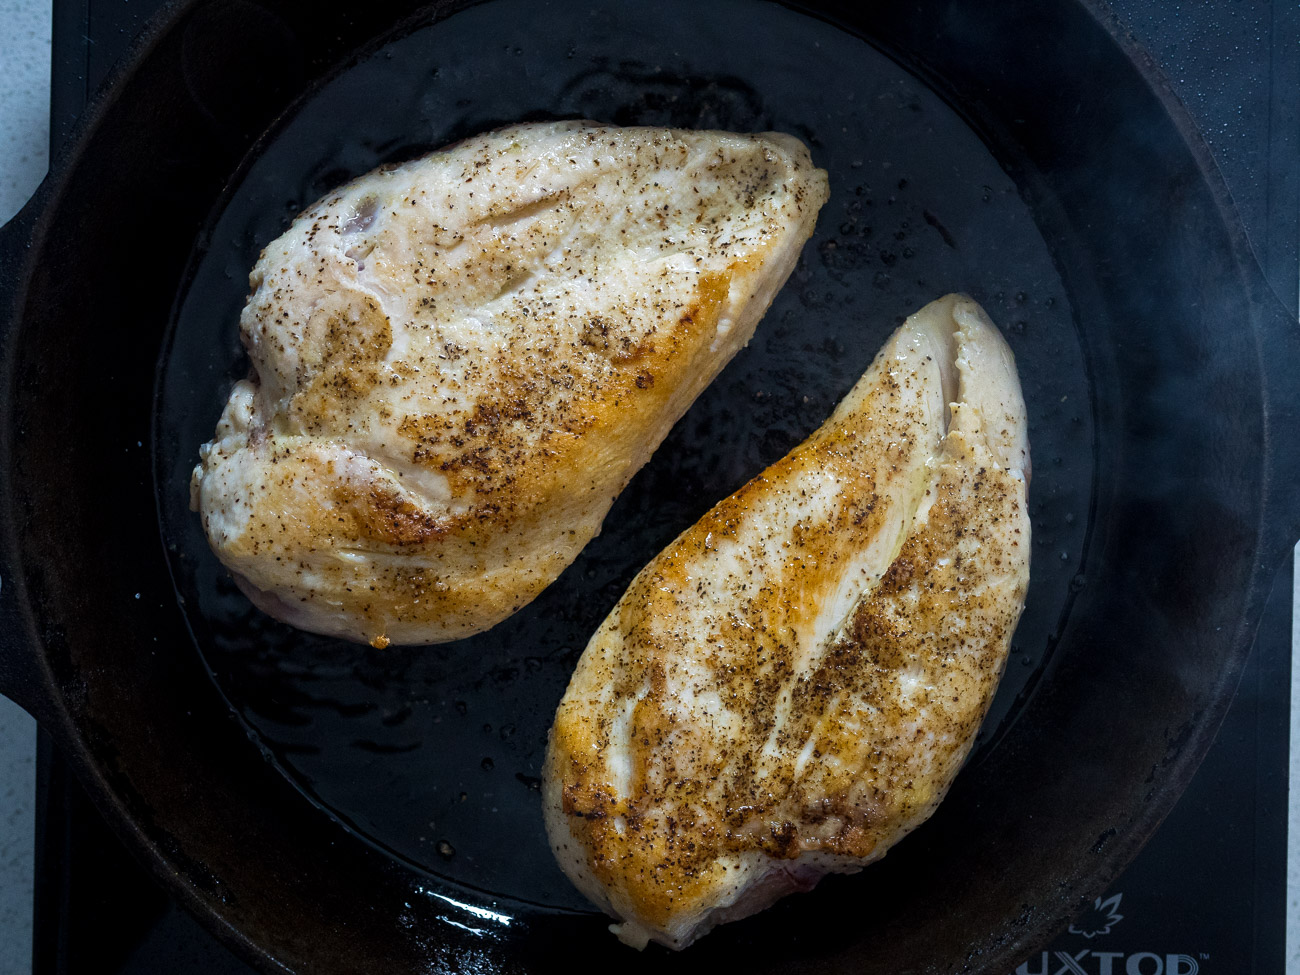 Pat chicken breasts dry and season with salt, pepper, and garlic powder. Heat oil over high heat and quickly sear chicken breasts on both sides.